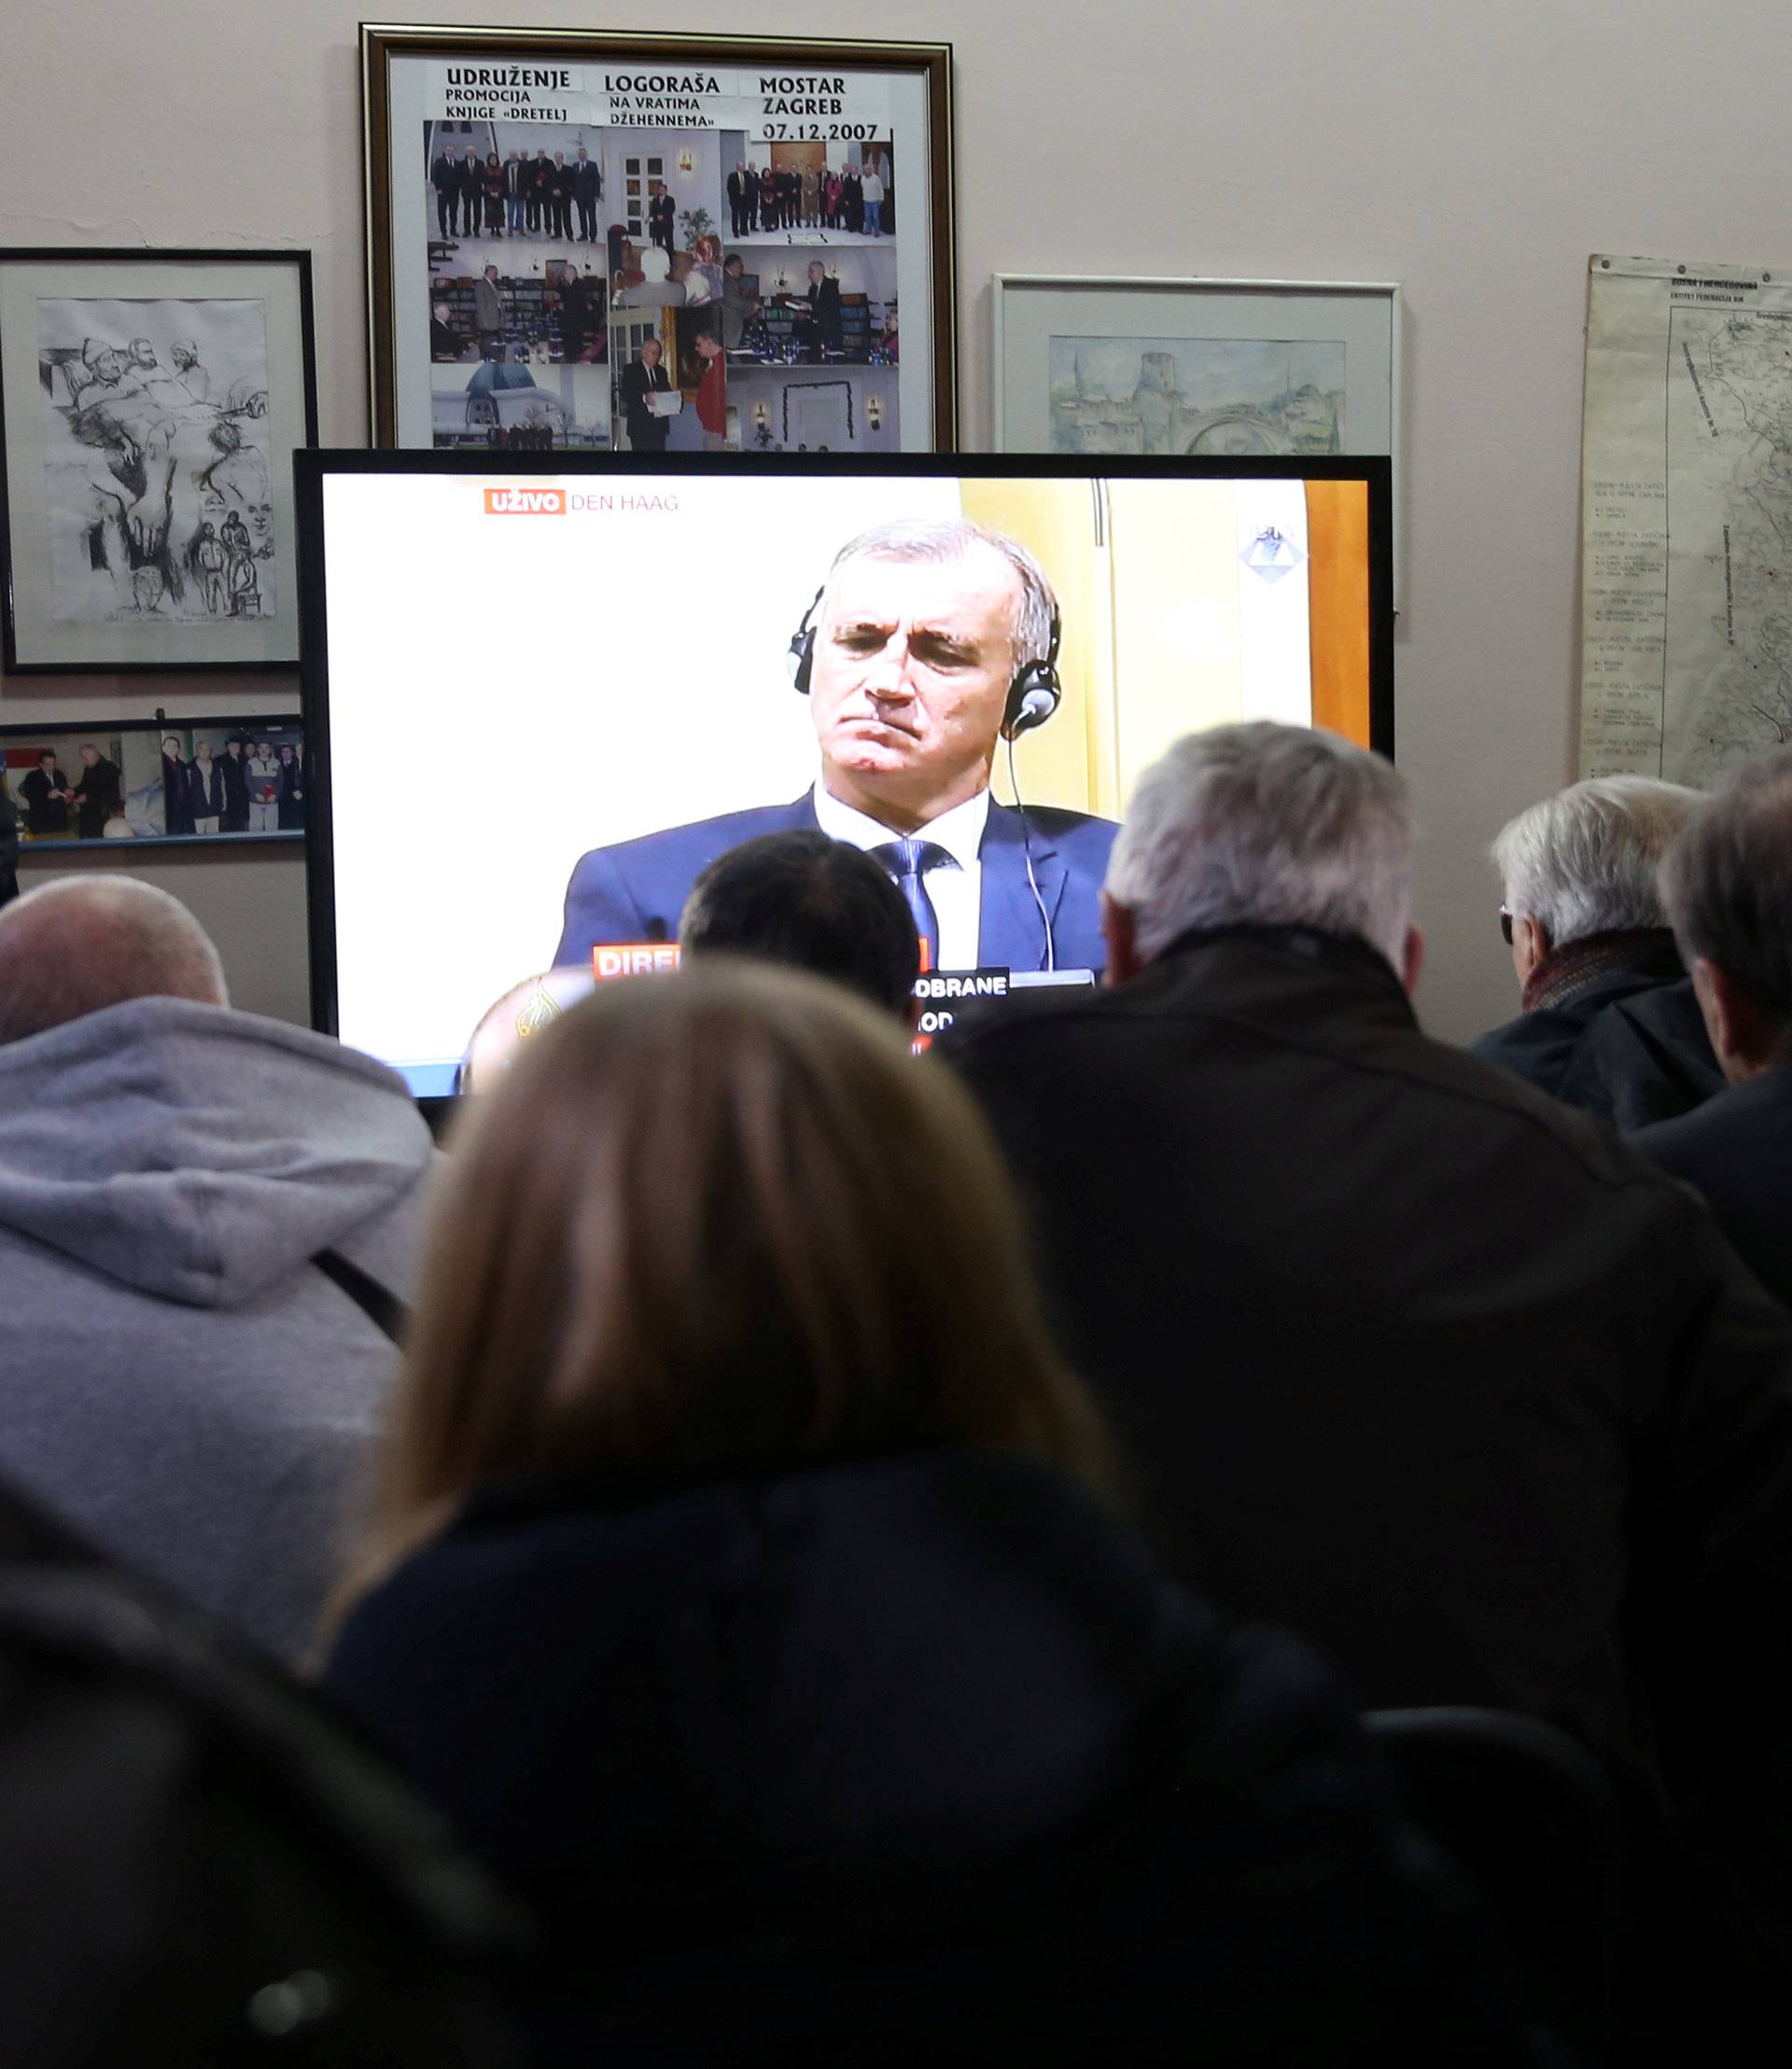 Union of former detainees watch a television broadcast of the appeal trial in the Hague, Netherlands, for six Bosnian Croat senior wartime officials accused of war crimes against Muslims in Bosnia's 1992-1995 war, in Mostar